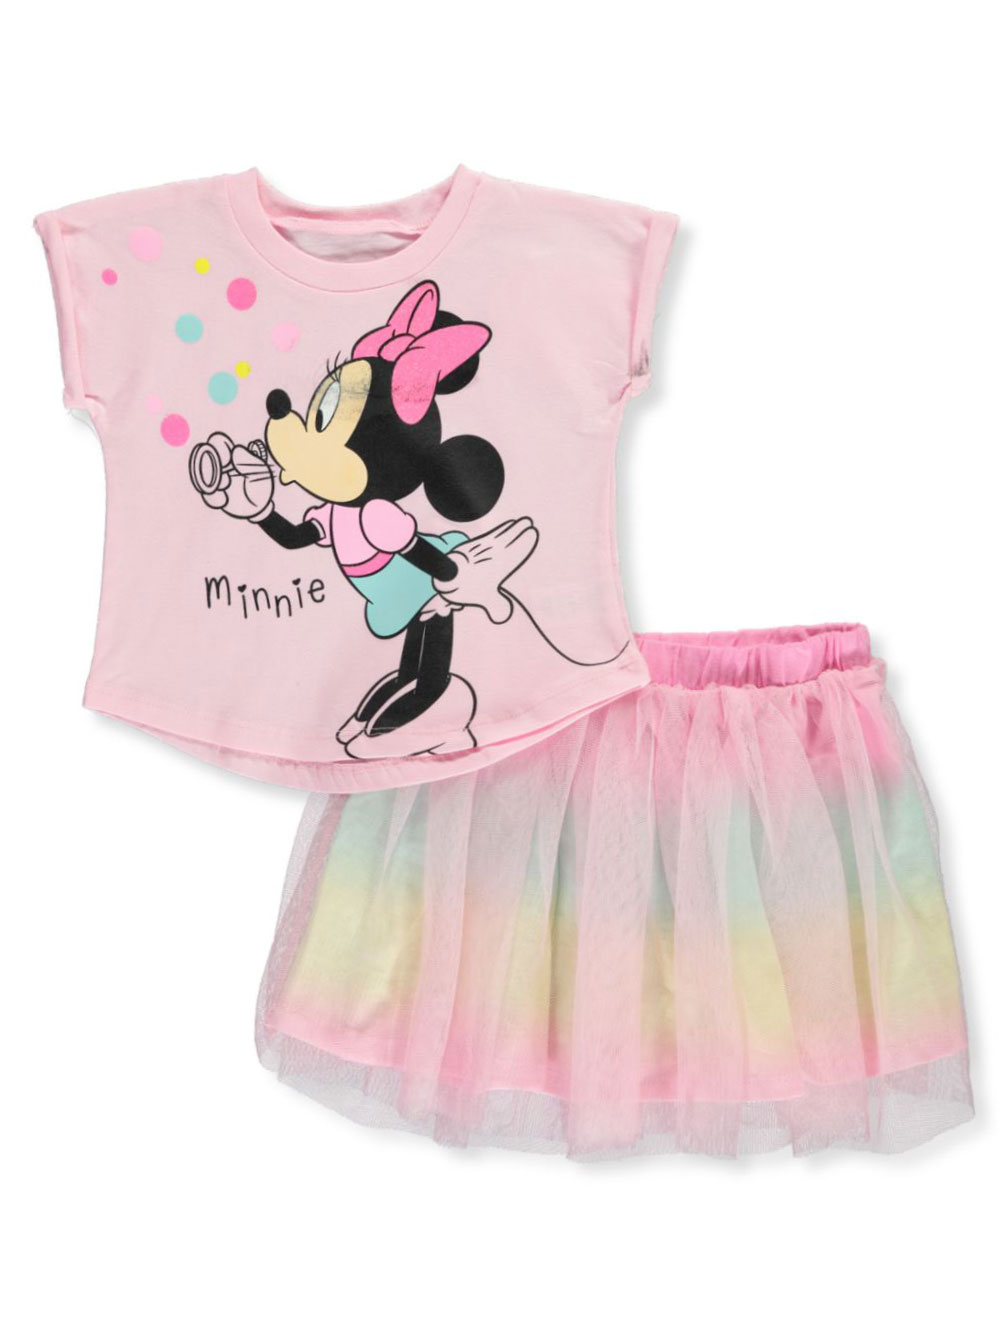 GIRLS 2 PIECE SET OUTFIT SKIRT /& TOP DISNEY MINNIE MOUSE 1 2 3 4 5 6 7 /& 8 YEARS